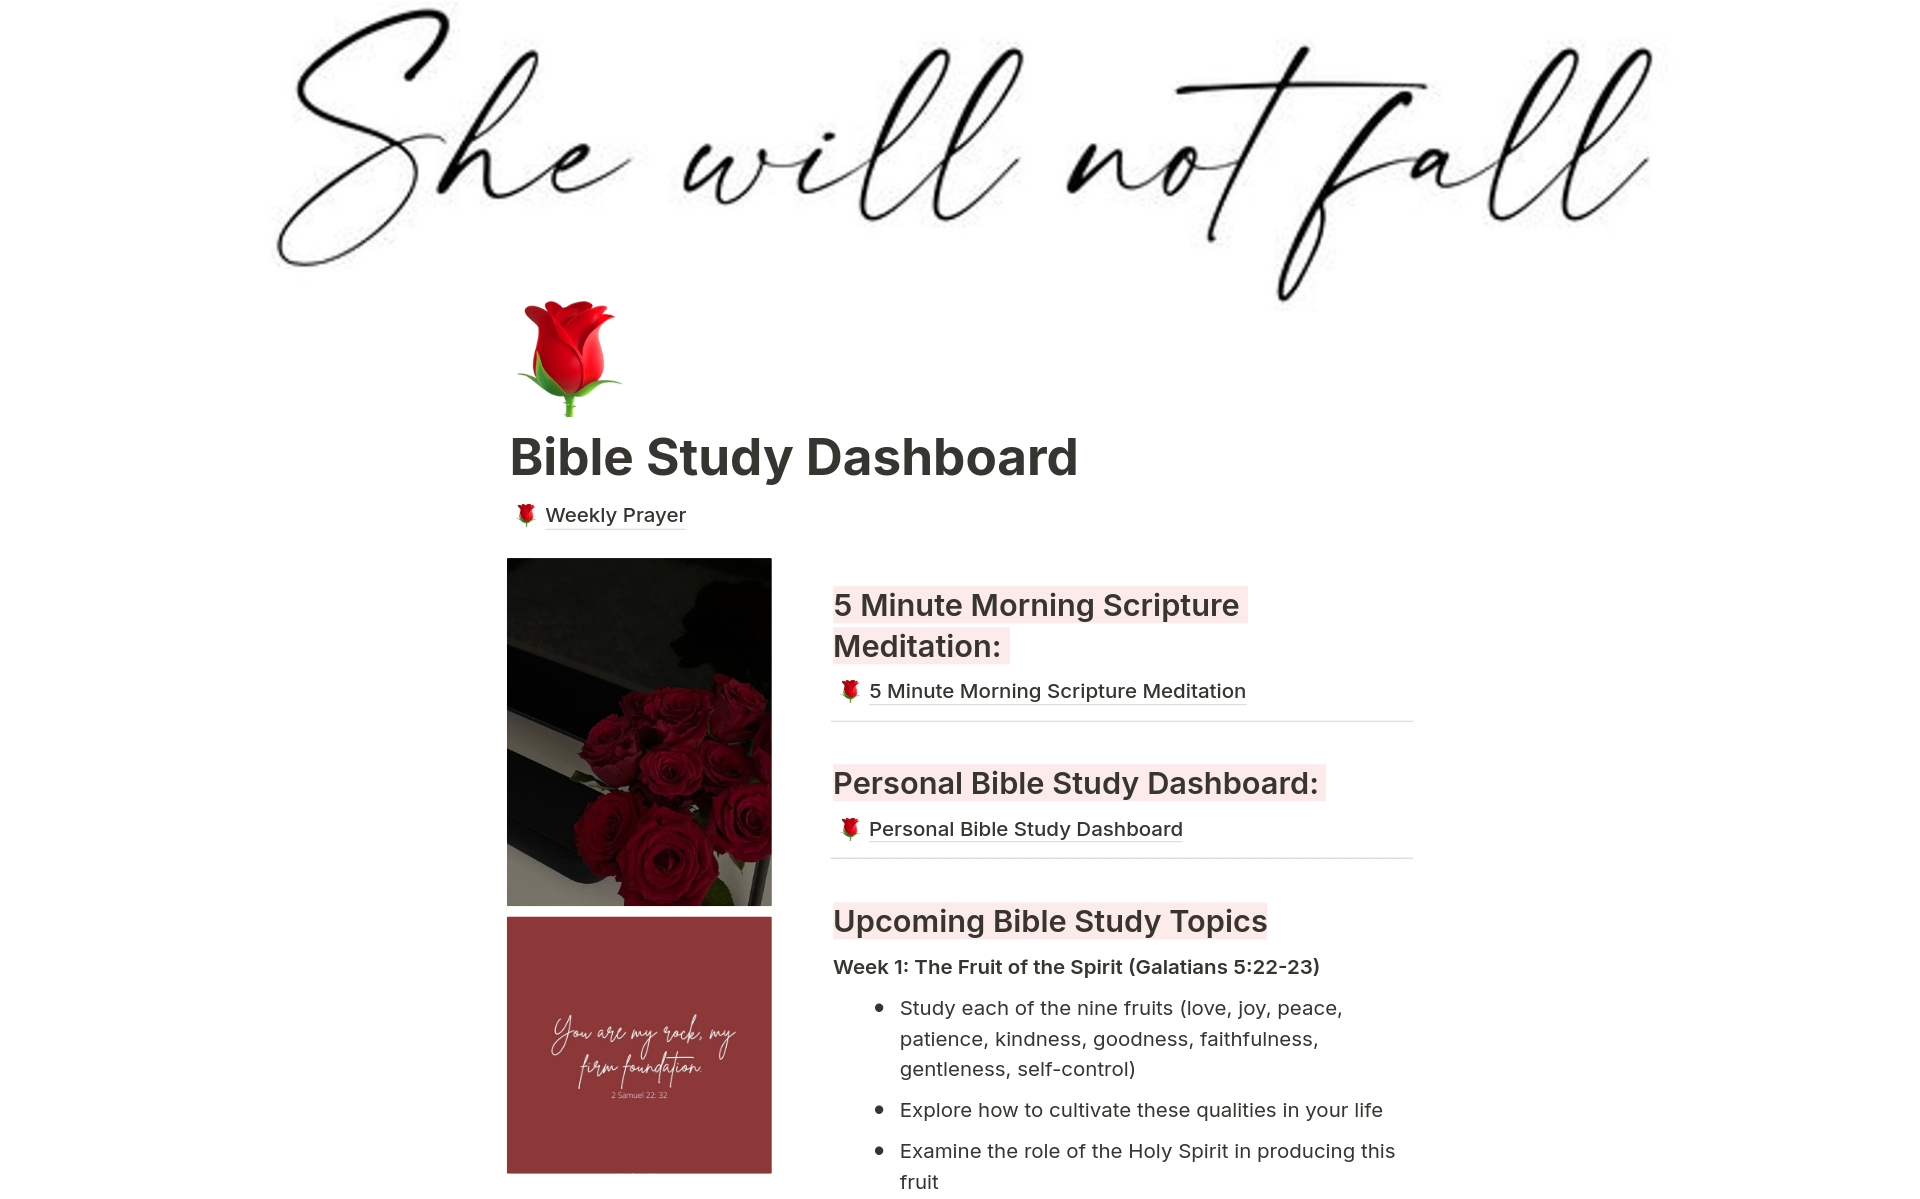 Calling all women seeking to strengthen their relationship with God! This Bible Study Notion Dashboard is a digital tool created to enable you to track your spiritual growth and ensure you are taking time to study God's word daily.